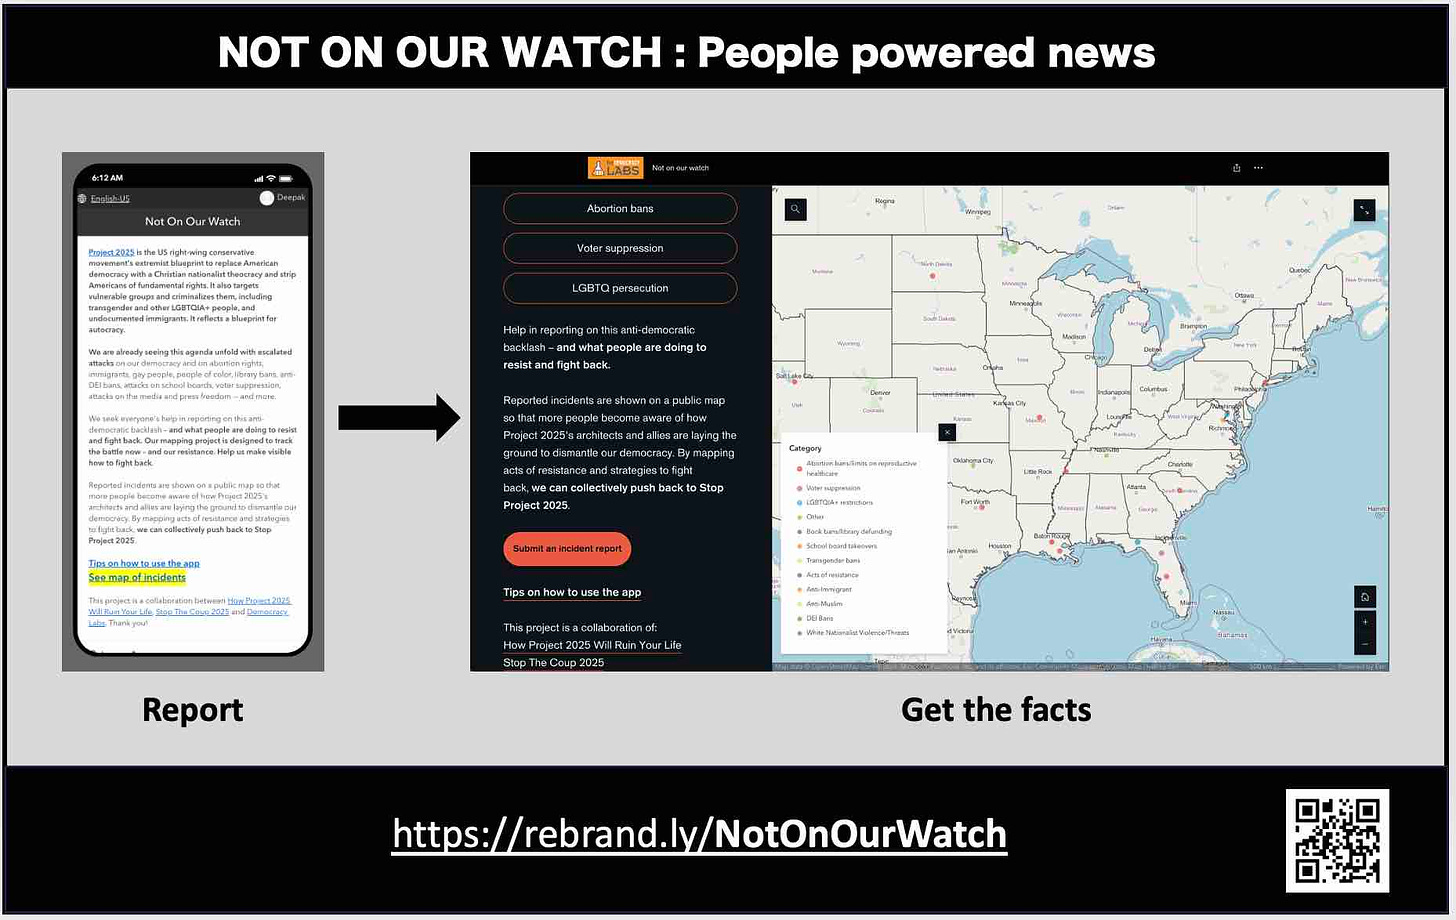 Not On Our Watch is a people powered solution to share the facts.